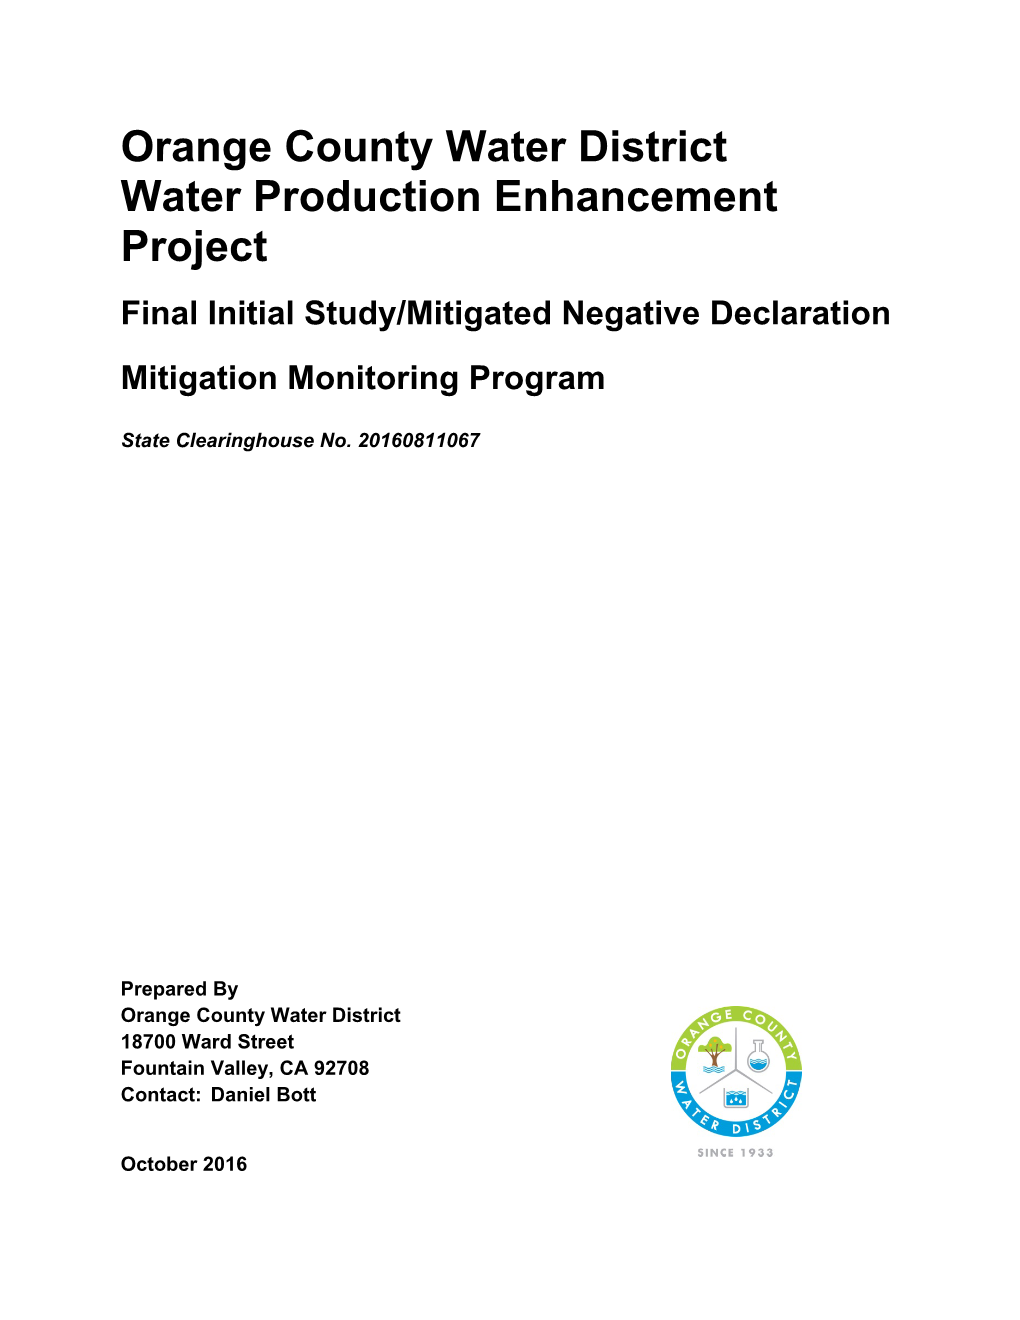 Orange County Water District Water Production Enhancement Project